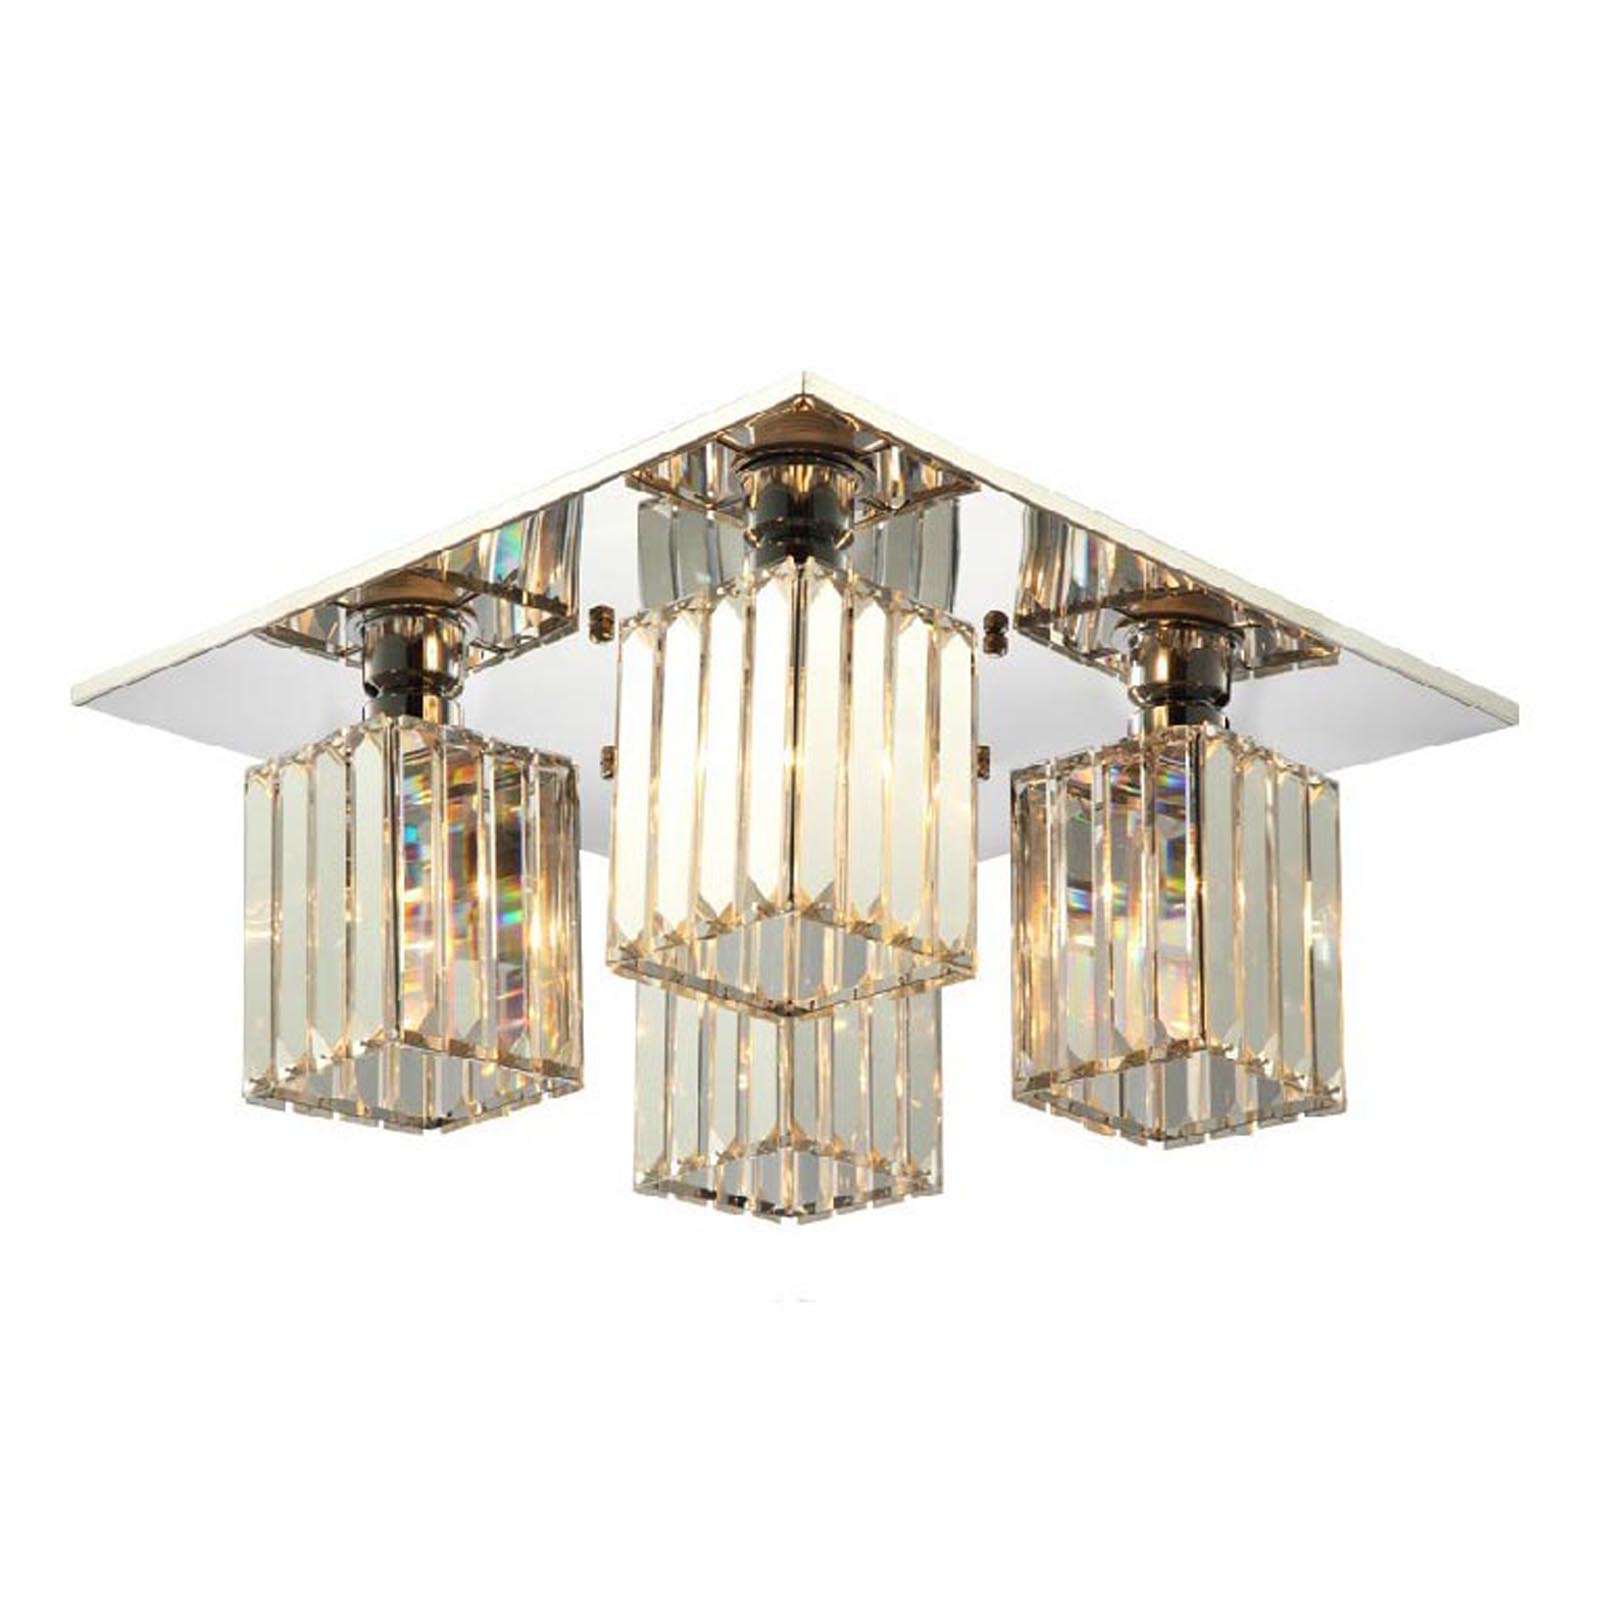 Fashionable crystal ceiling lamp HL-9507-4X-Fashionable crystal ceiling lamp HL-9507-4X